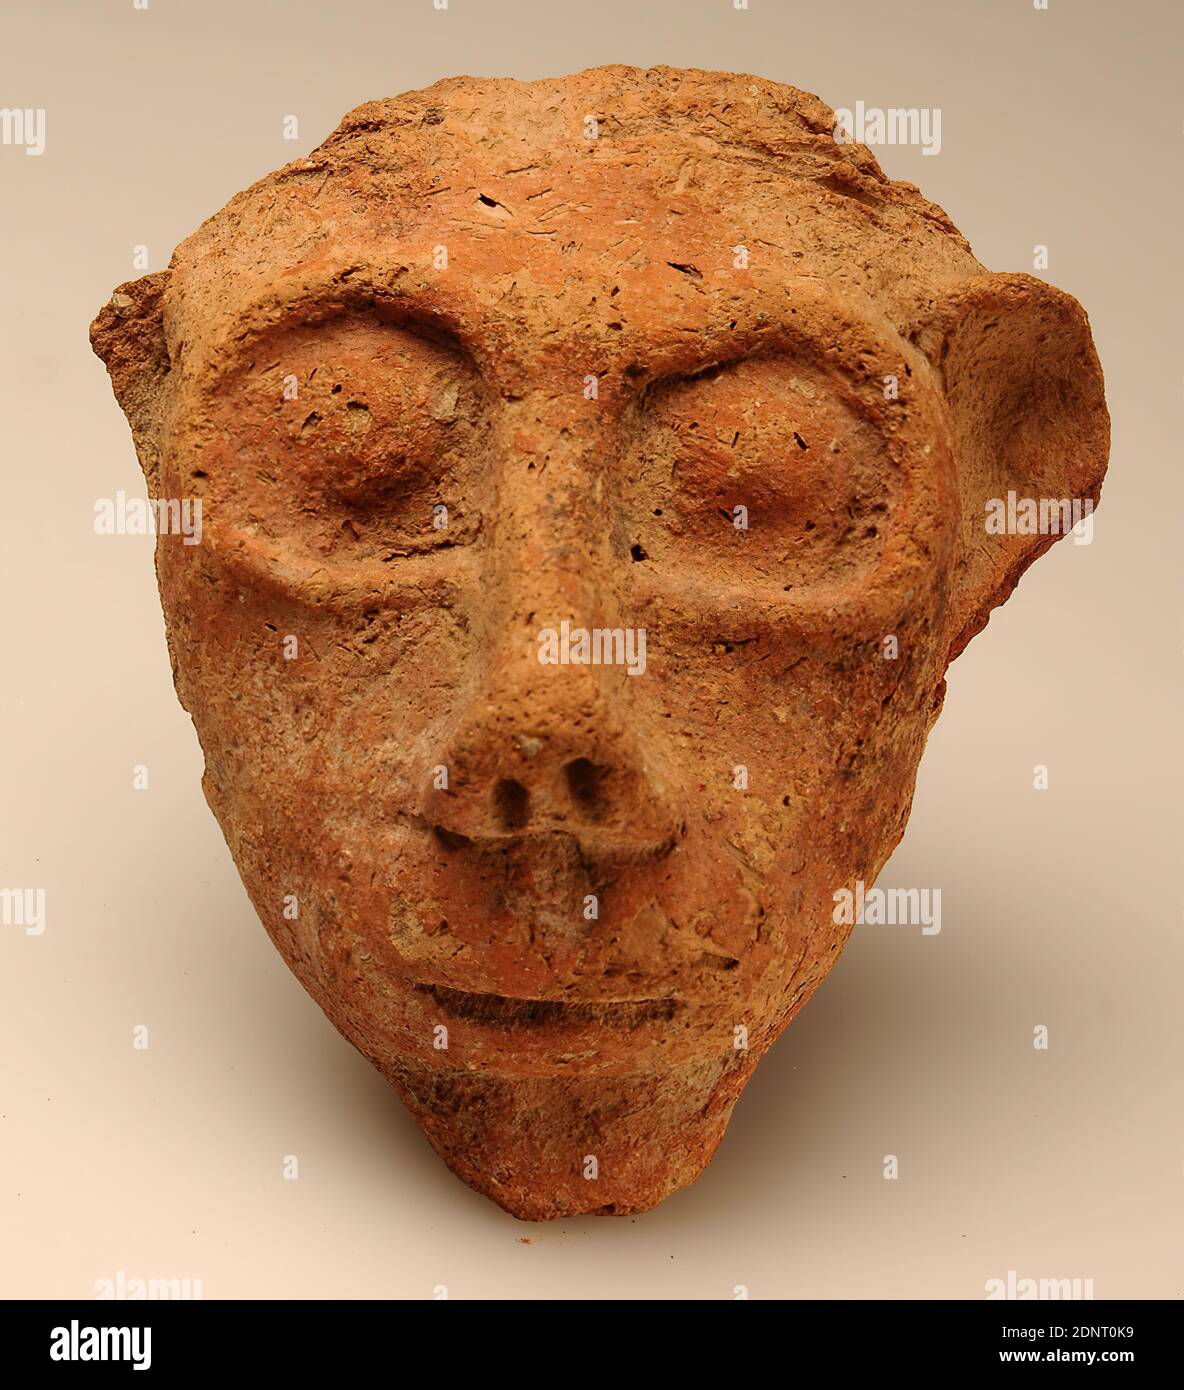 Small head, clay, hand modelled, clay, hand modelled, Total: Height: 7.7 cm; Width: 7.4 cm; Depth: 4.2 cm, ceramics, small sculptures, antiquity, The frontal view of the head is characterized by large, almost round eye sockets with a circumferential arch, the protruding, widely projecting left ear and a narrow, horizontally incised mouth. The nose is a little pre-bent. The cheeks are flat and don't step out. Below the chin, the base of the neck is preserved. Above the forehead there are two horizontal incised lines each indicating hair or headgear. A hole on the back served for fastening. Stock Photo